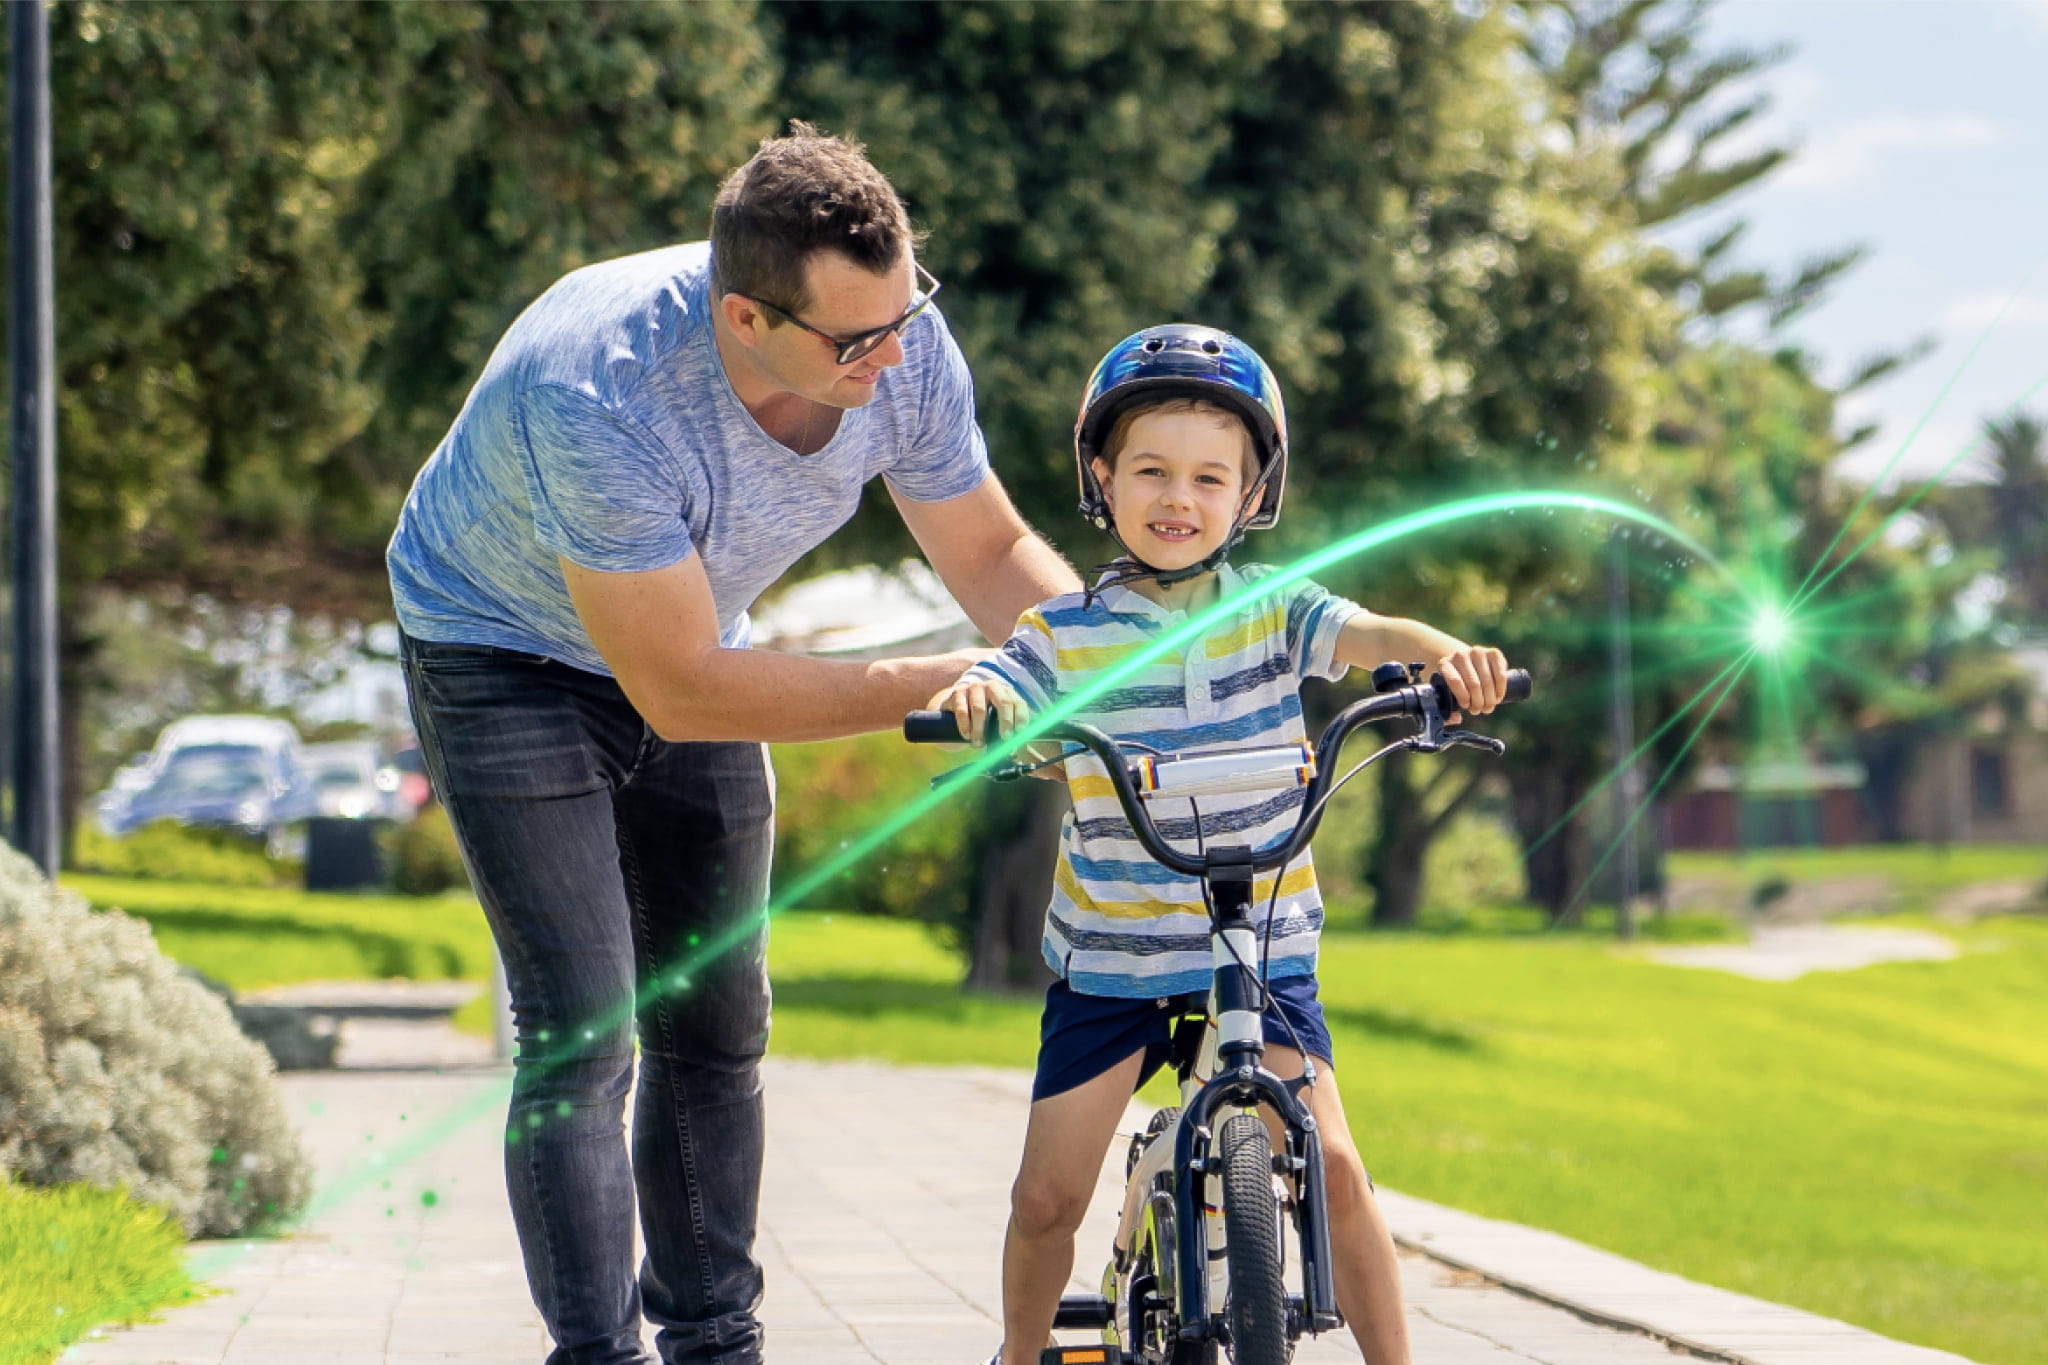 A young boy riding a bicycle in a local park with his dad supporting him